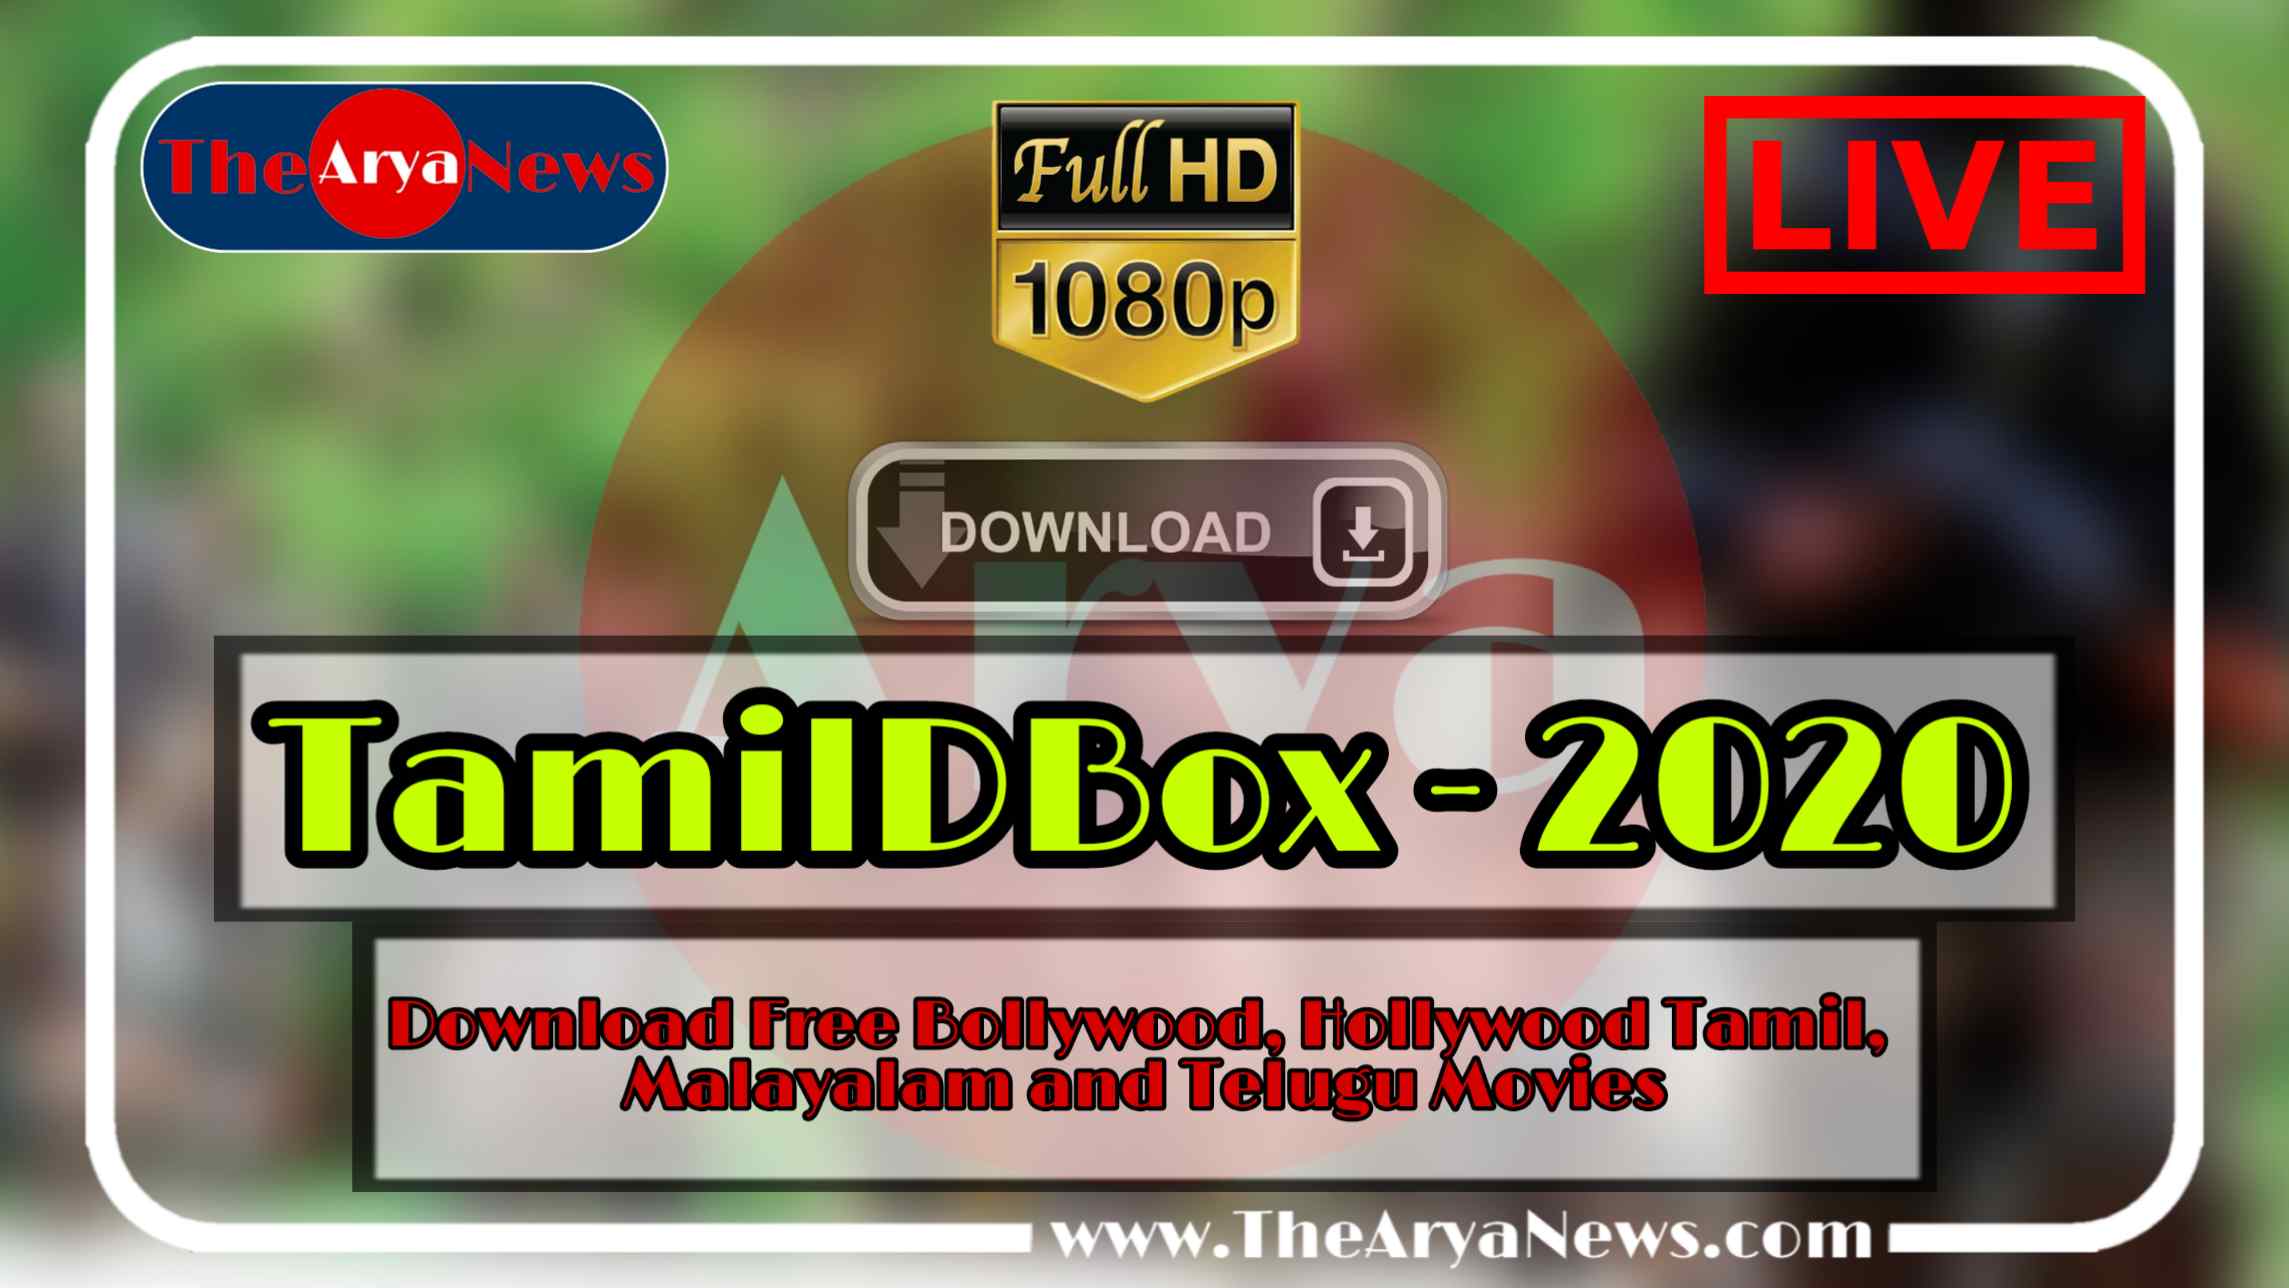 TamilDbox 2020 » Download Free Bollywood, Hollywood Dubbed Movies